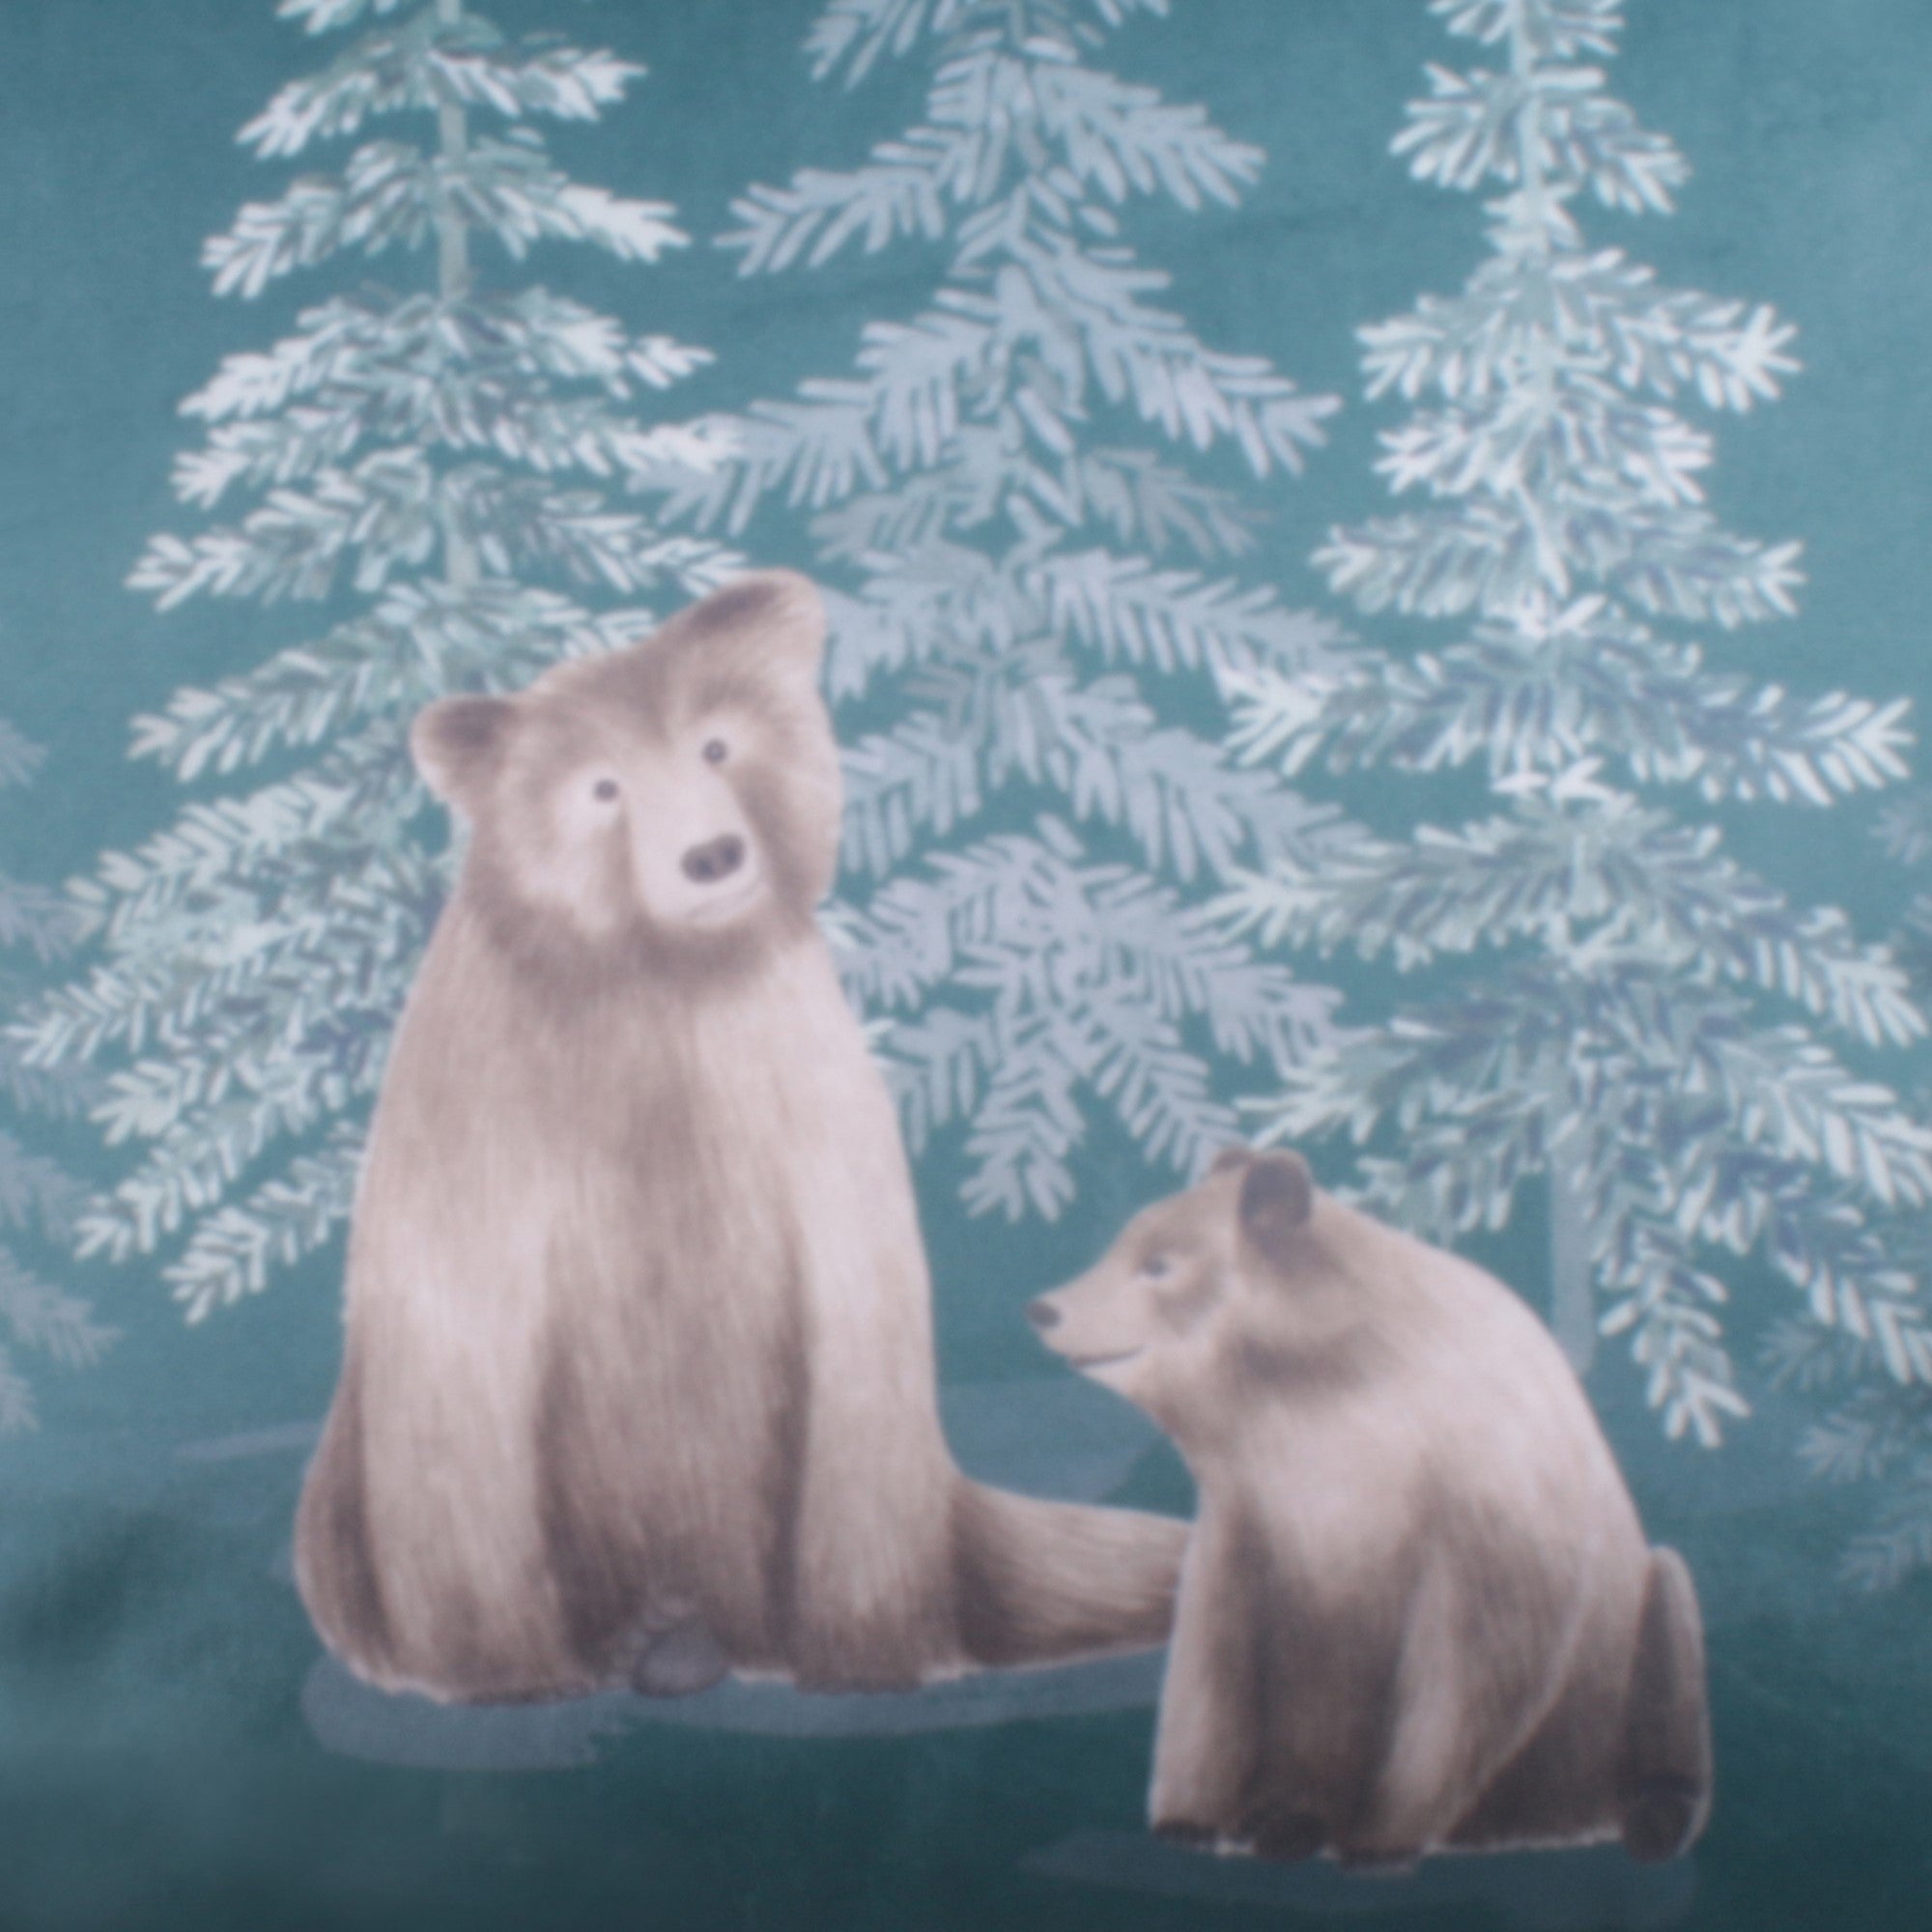 Cushion Cover Bear Walks by D&D Lodge in Teal